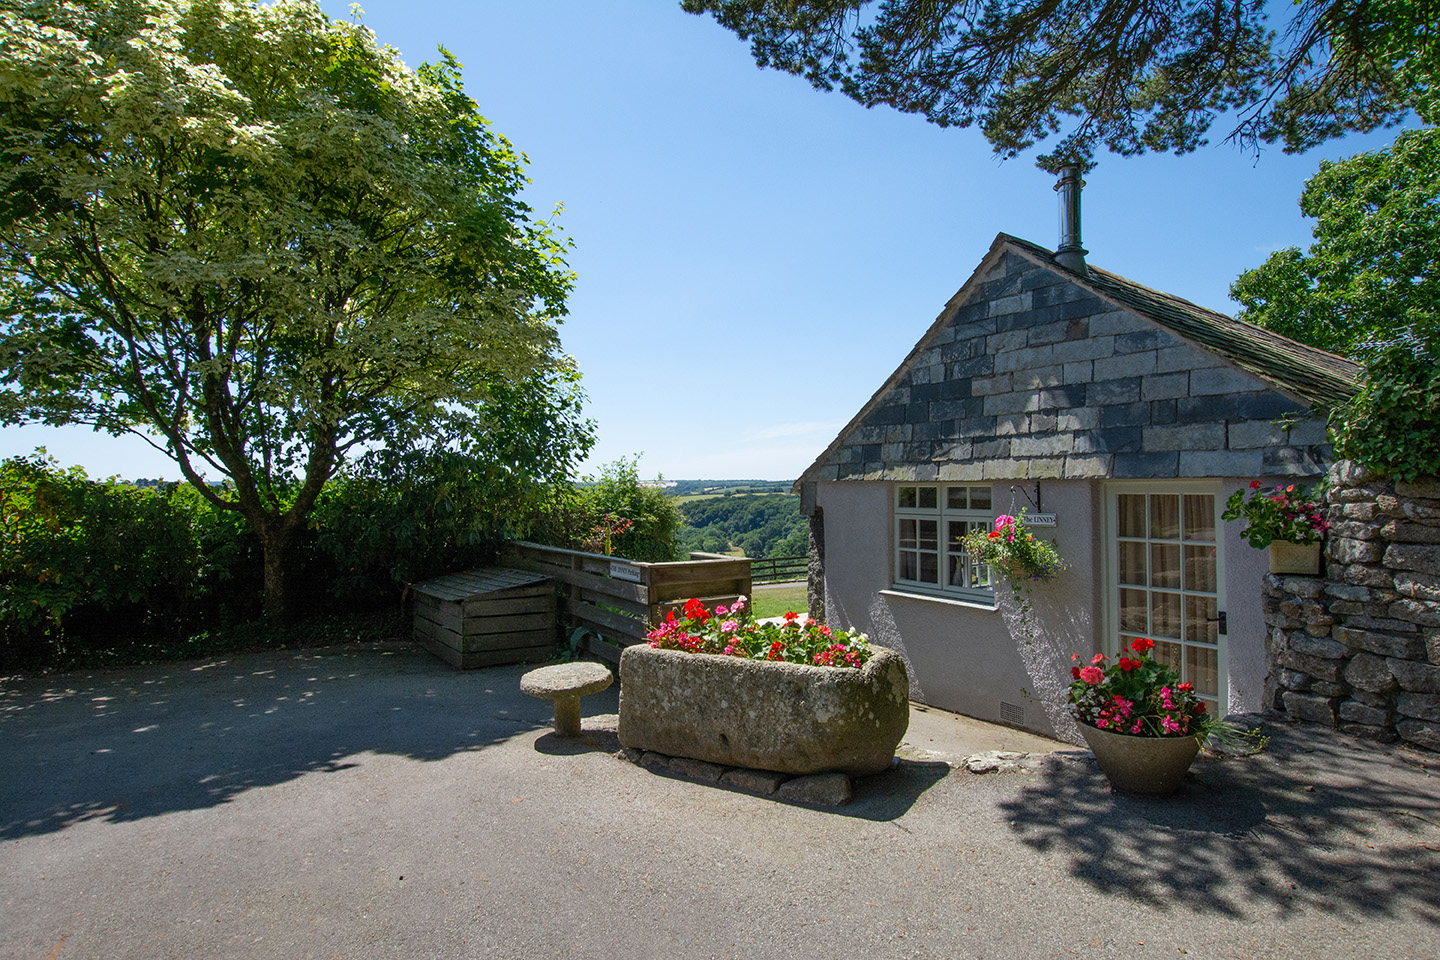 The exterior of the Linney luxury self catering converted barn holiday cottage at Penrose Burden in North Cornwall 02.jpg